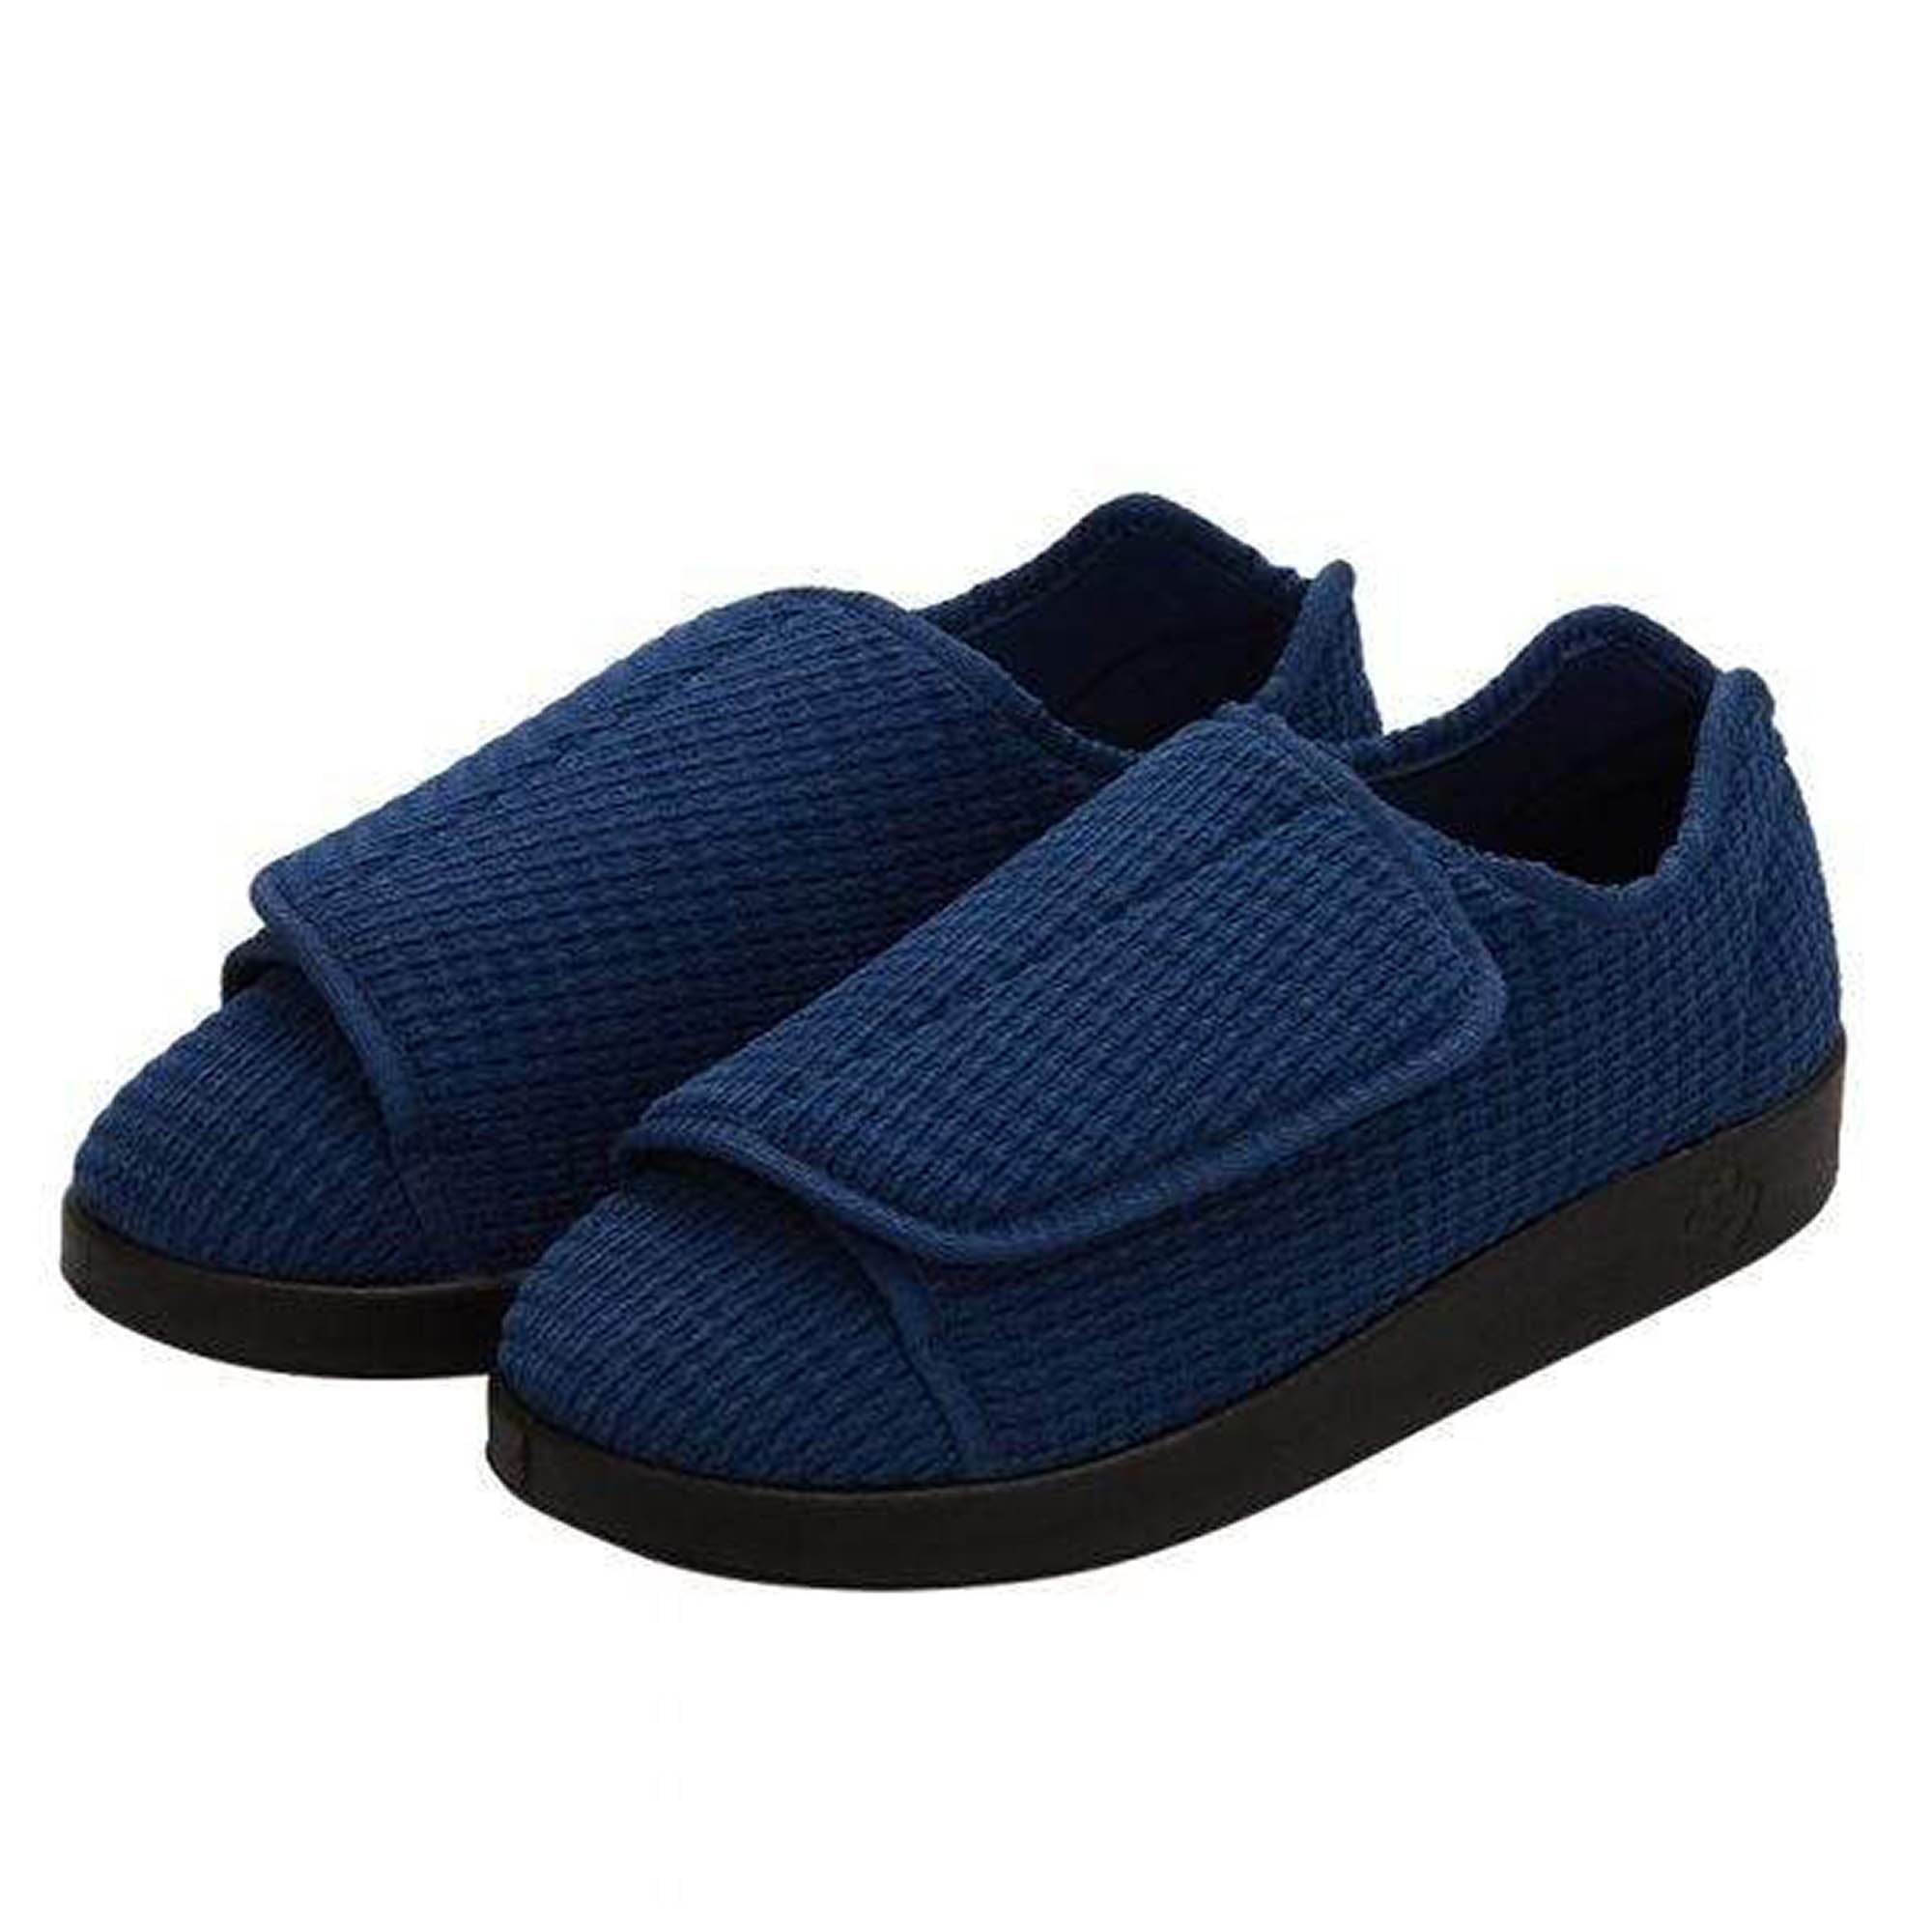 Silverts Men's Extra Extra Wide Slip-Resistant Slippers - Black - 14